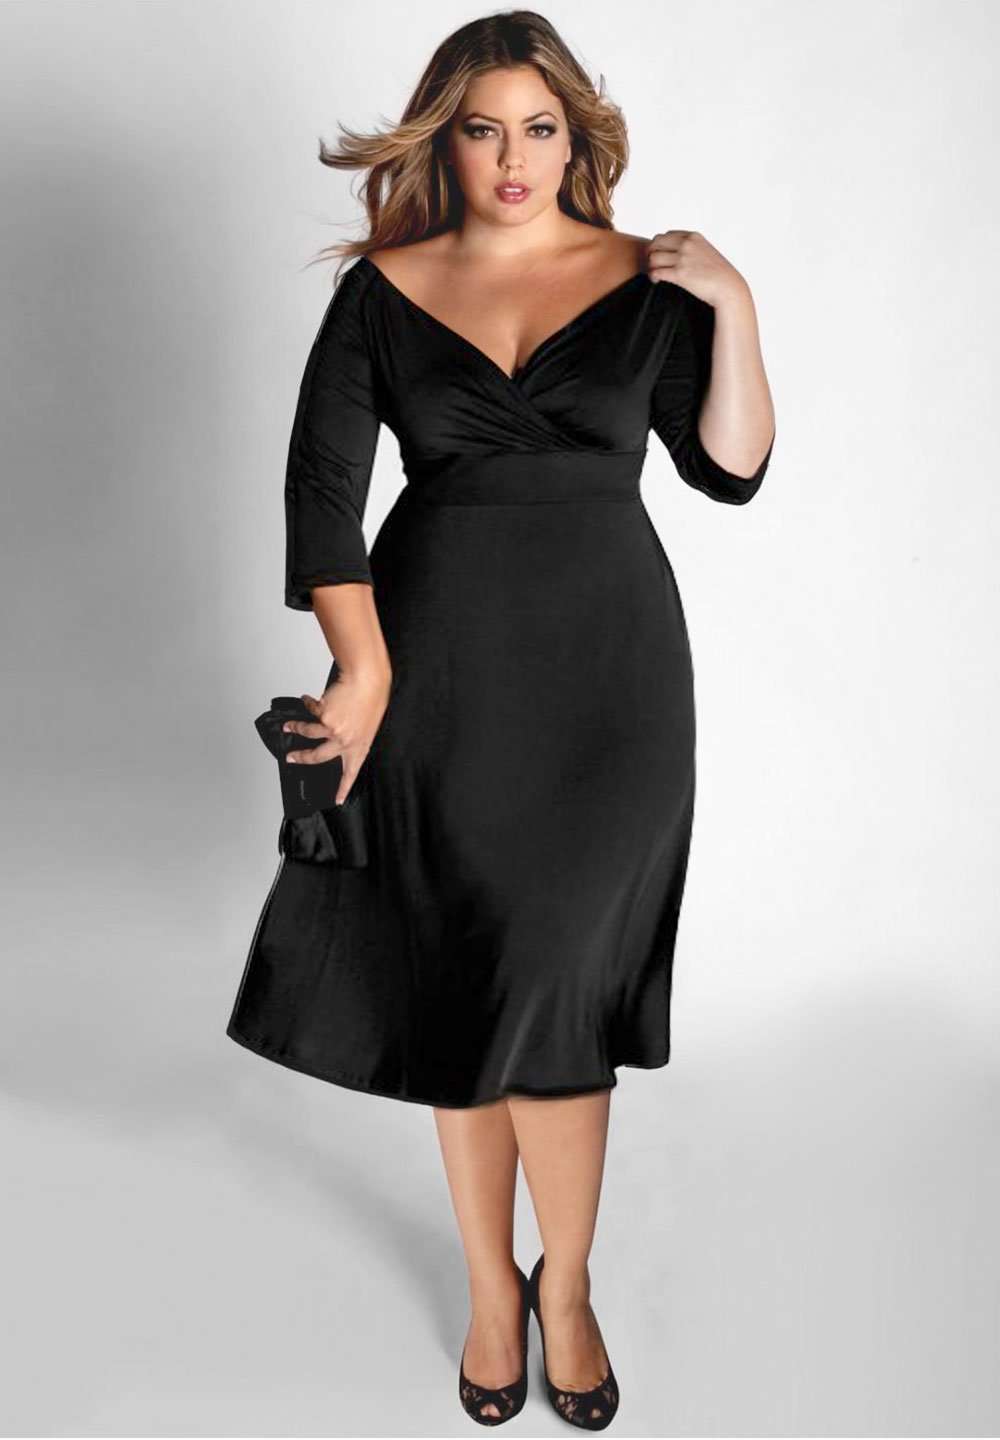 Plus Size Style Icons to look up to  Plus size fashion, Celebrity style  inspiration, Plus size dresses